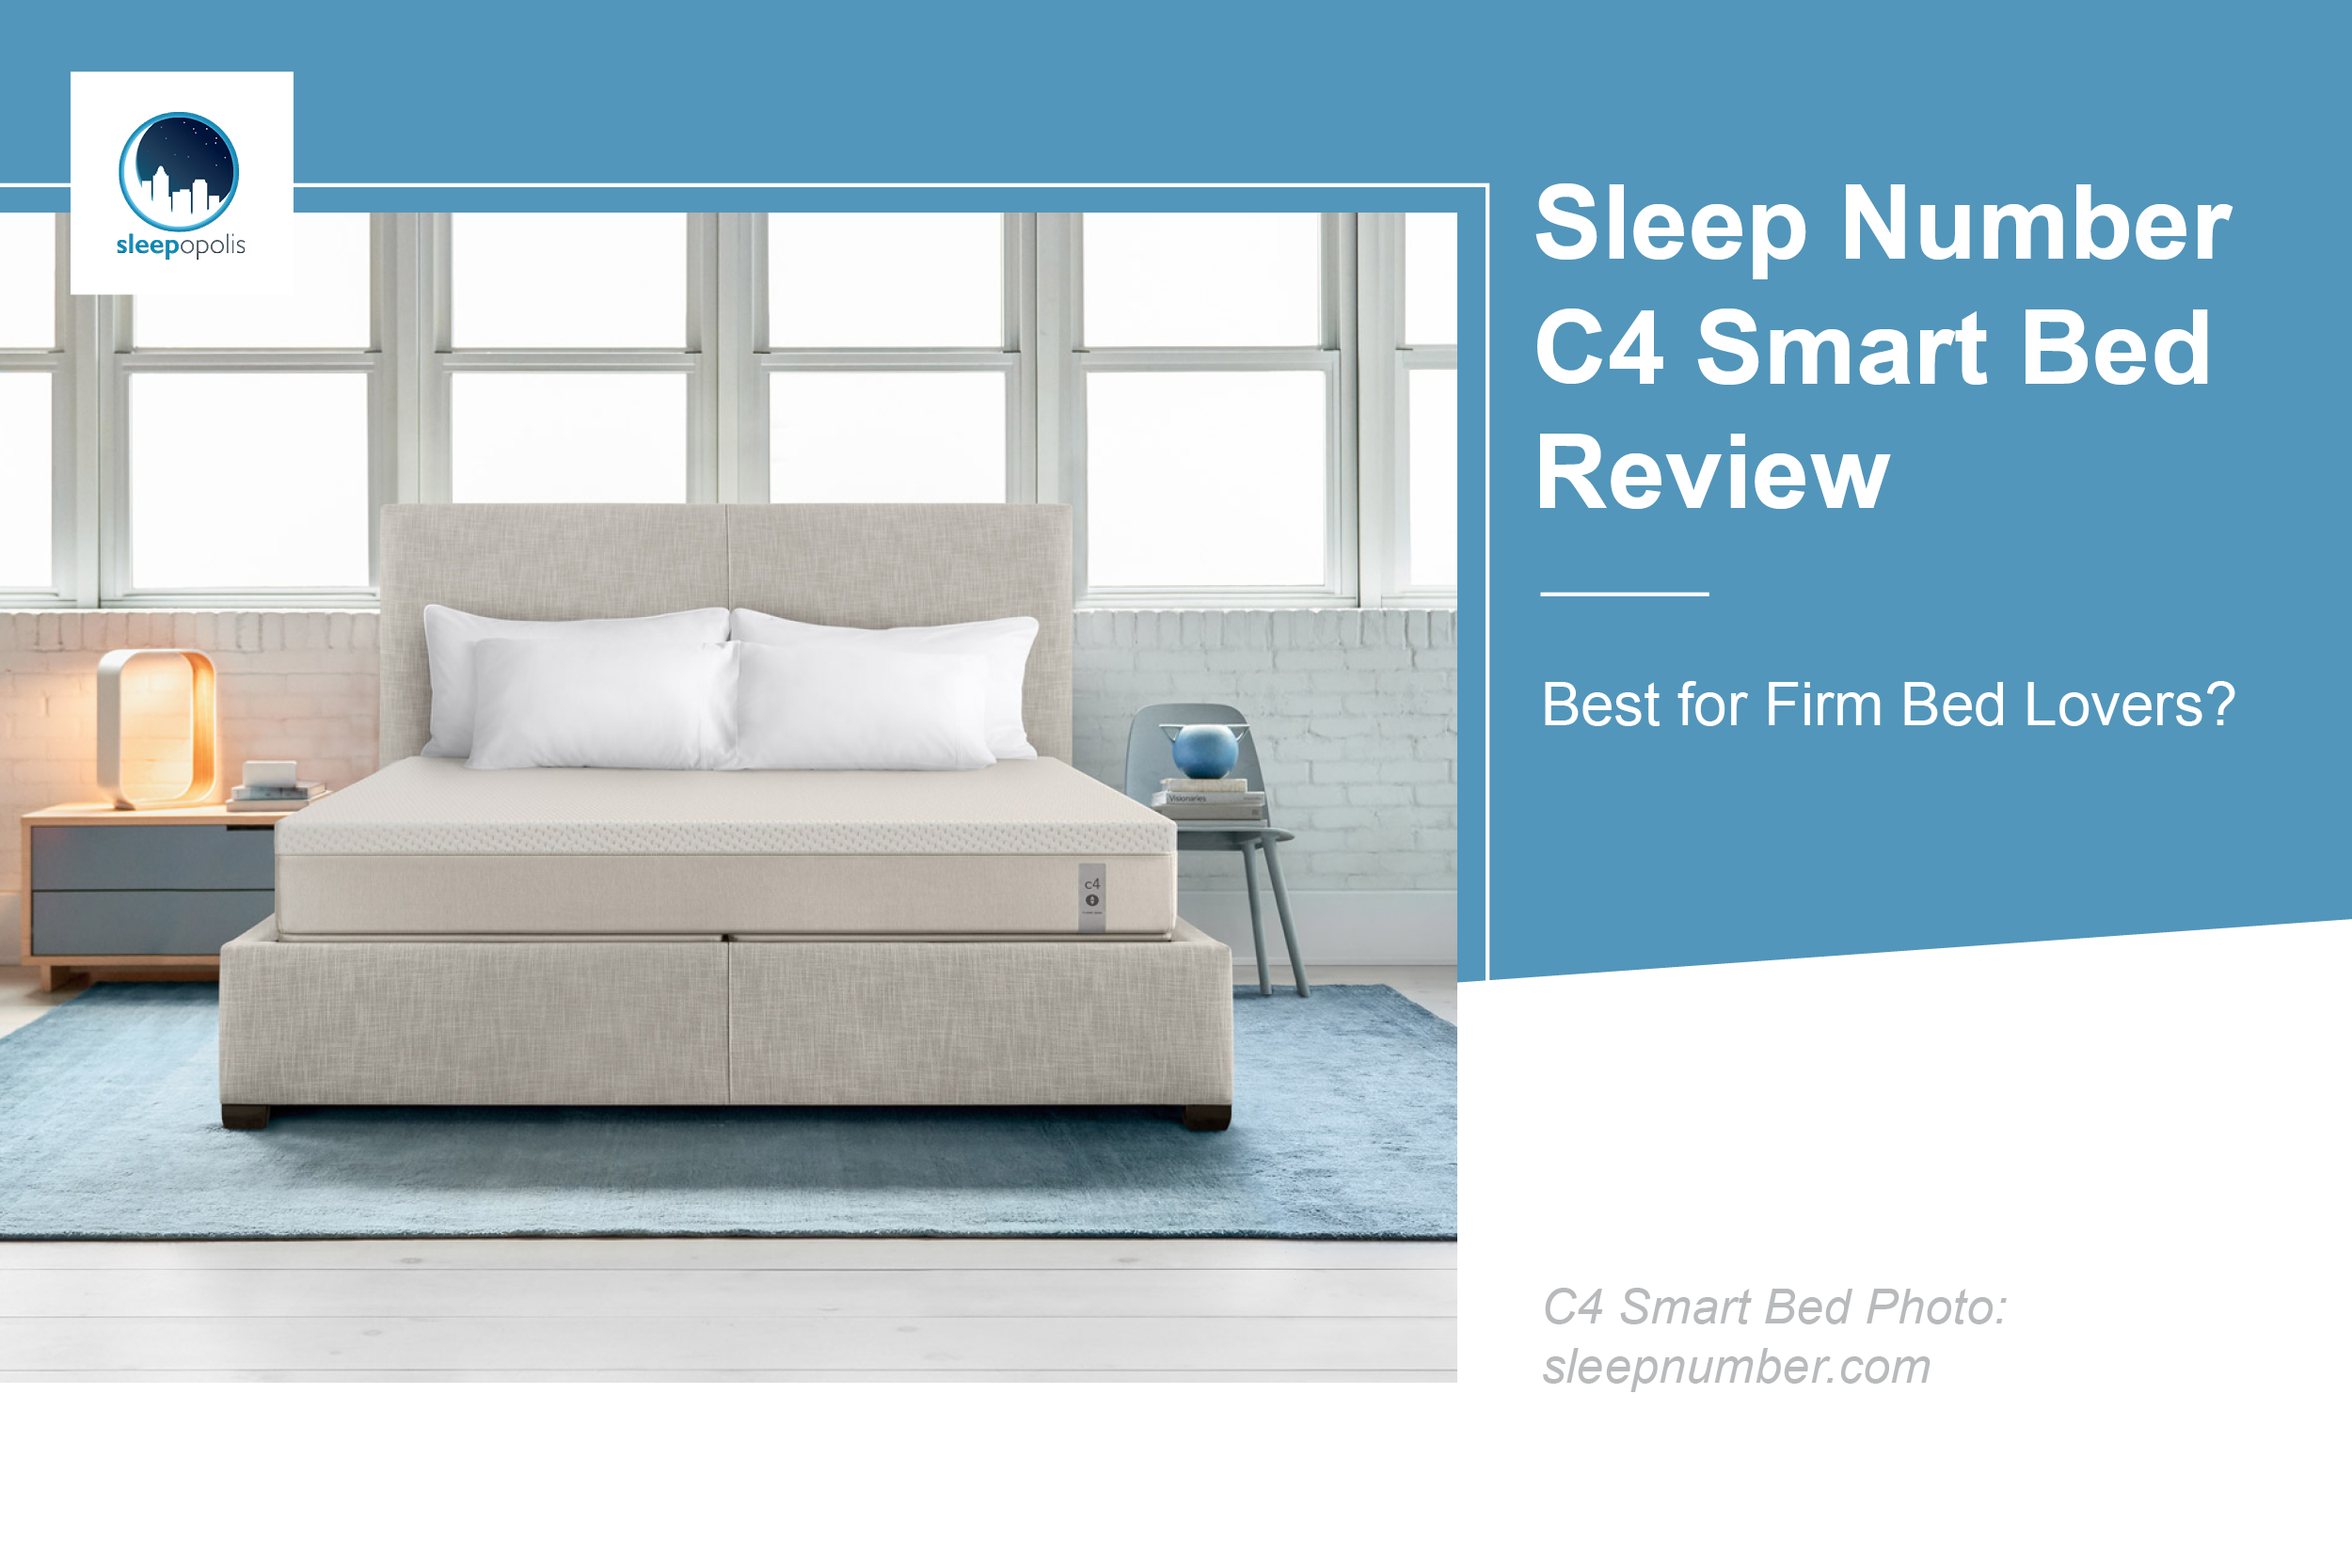 Sleep Number 360 C4 Smart Bed Review, Sleep Number Bed Cost King Size Adjustable